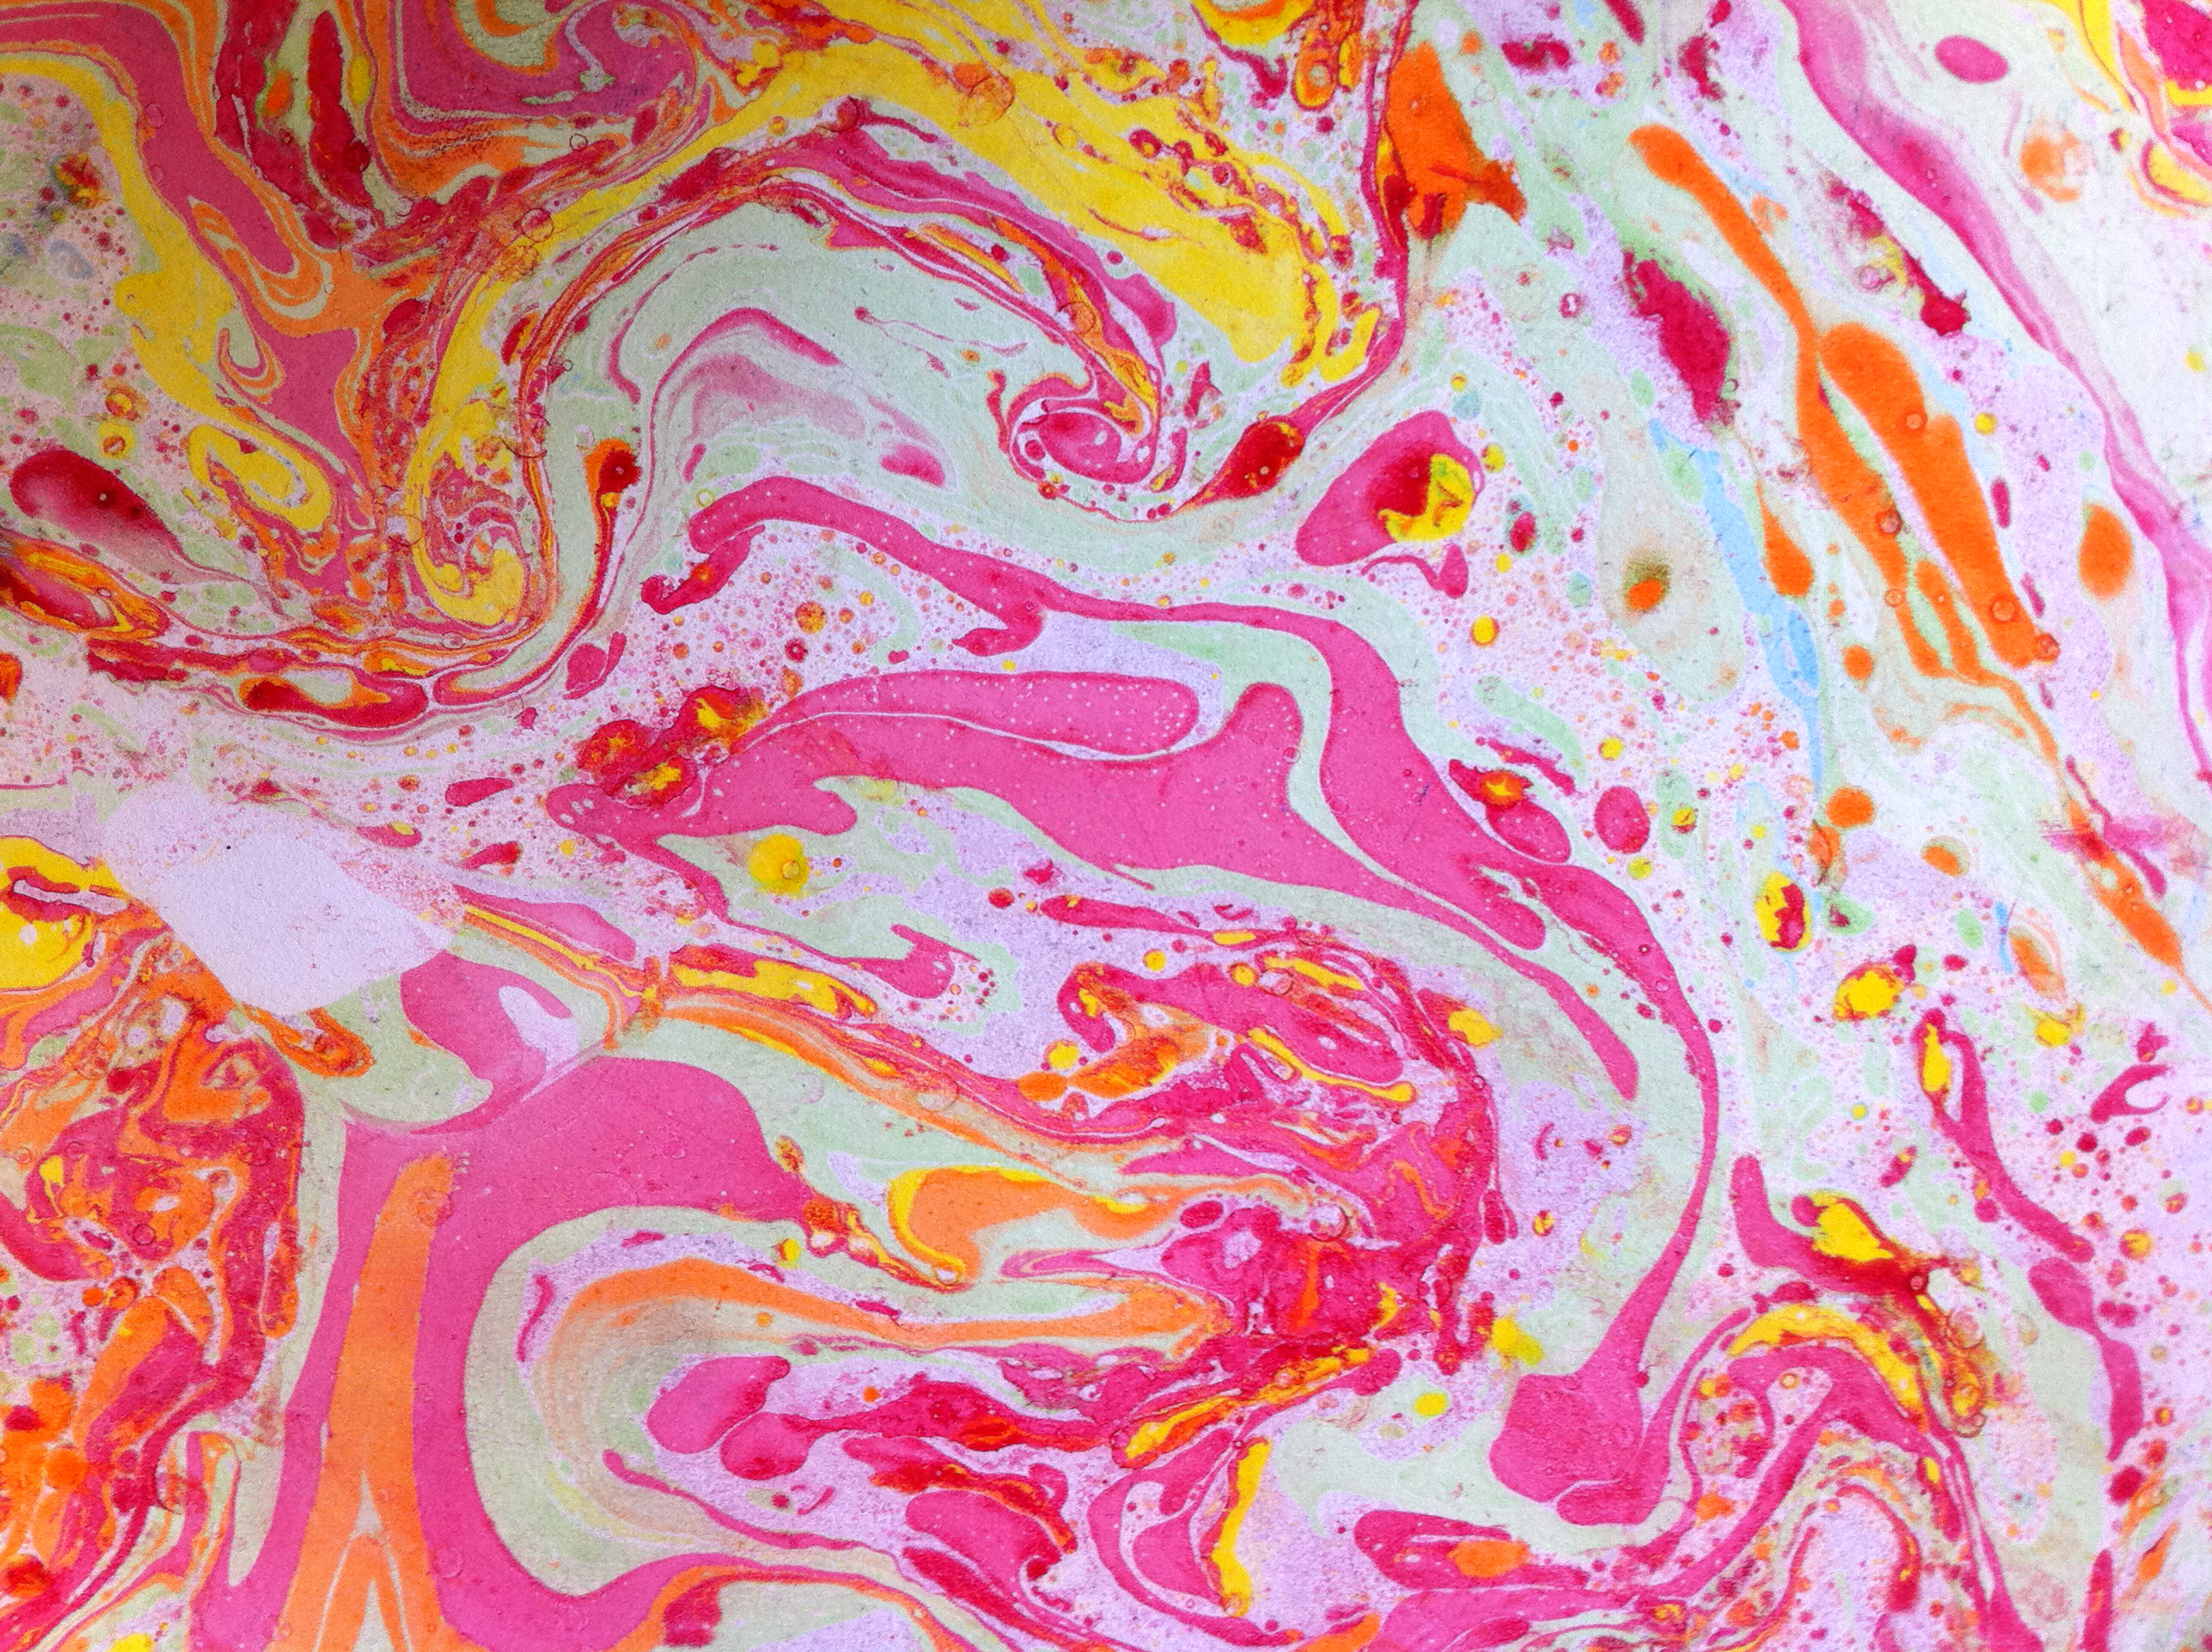 water paper marbling for corner house Marvelous the  Marbling tales from